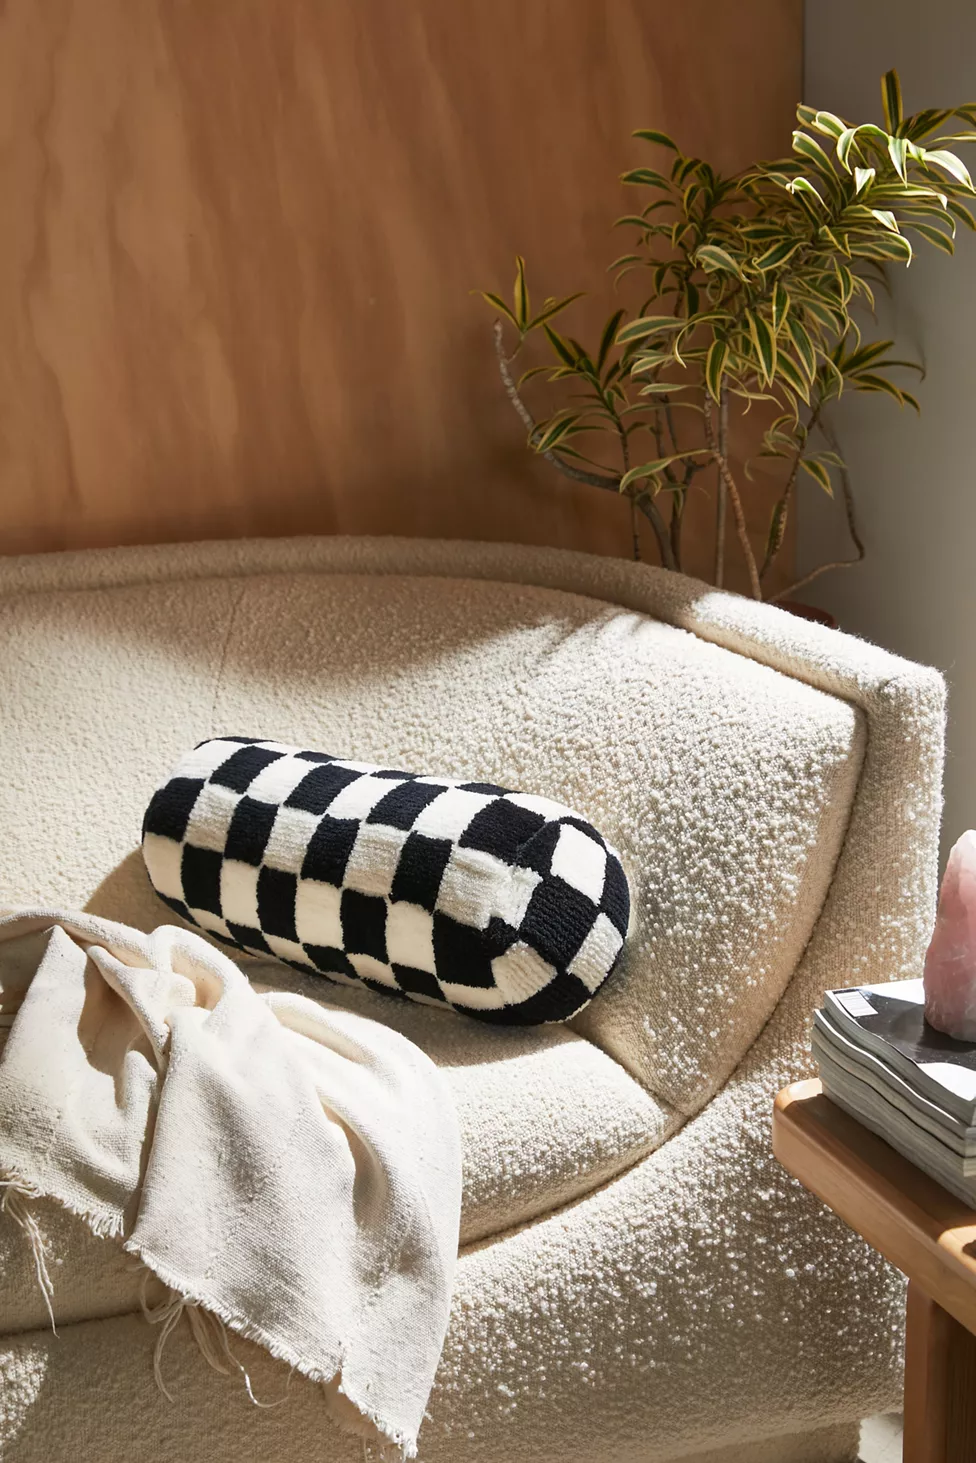 Cozy Comfort: Relax in Style with Bolster Pillows